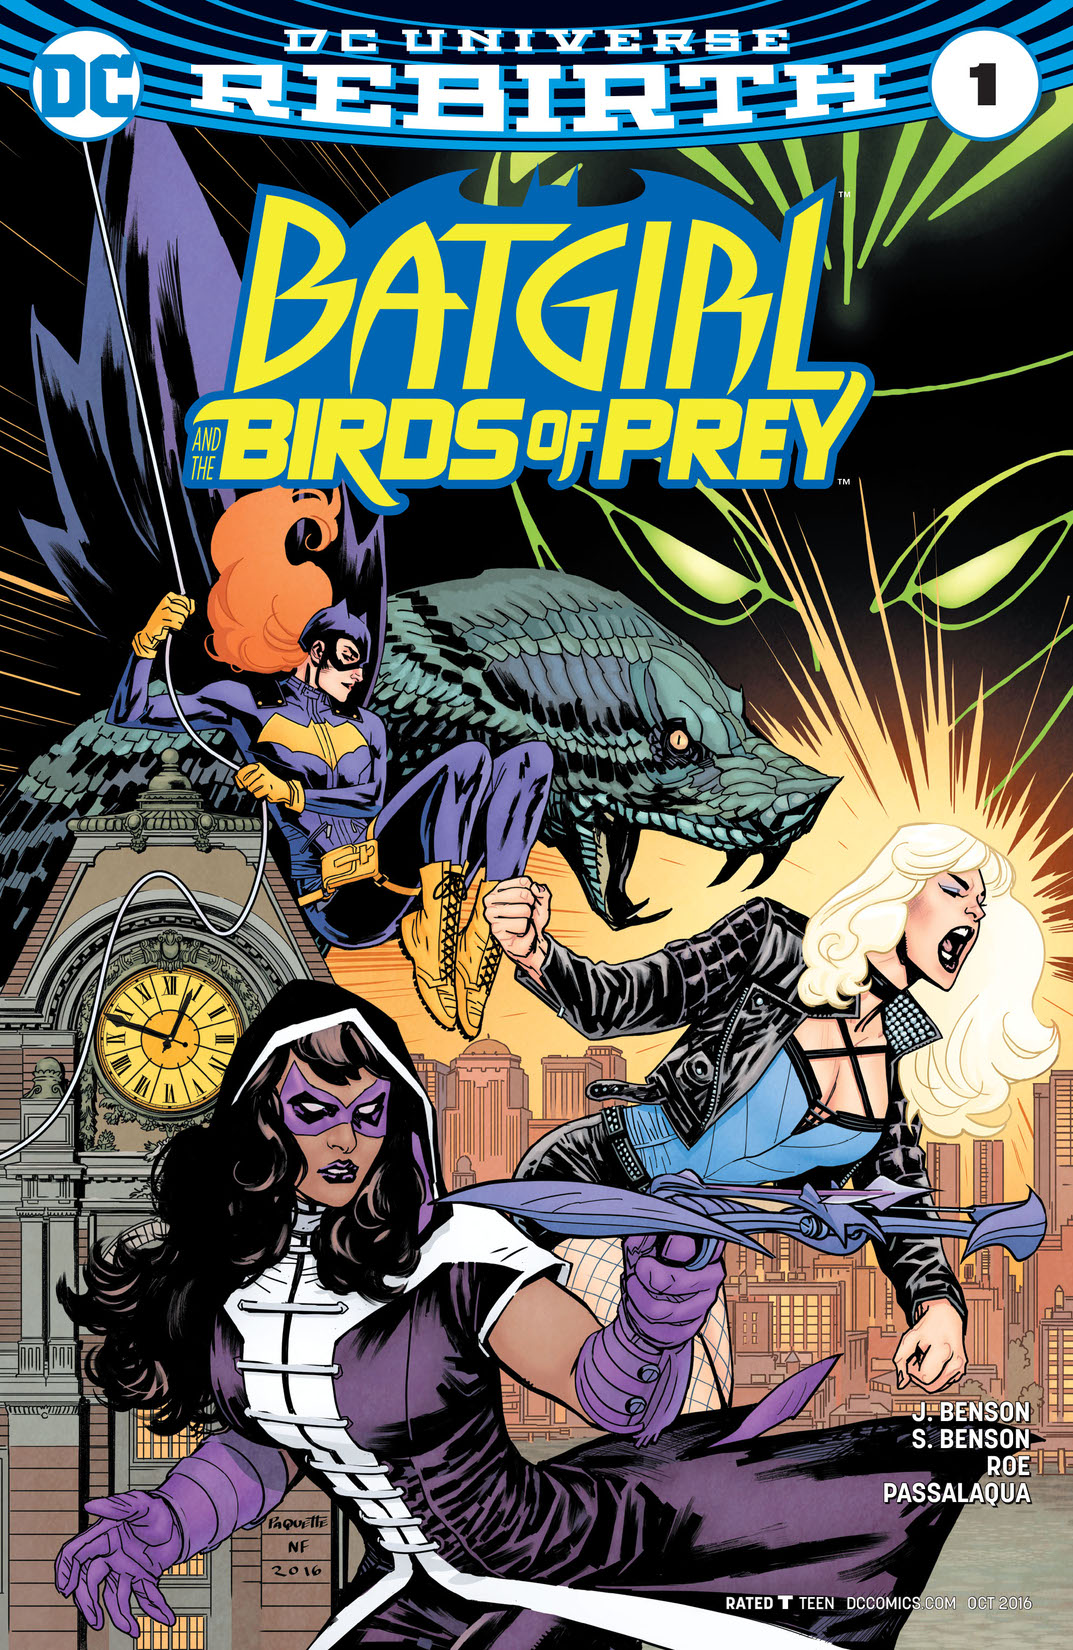 Batgirl and the Birds of Prey #1 preview images